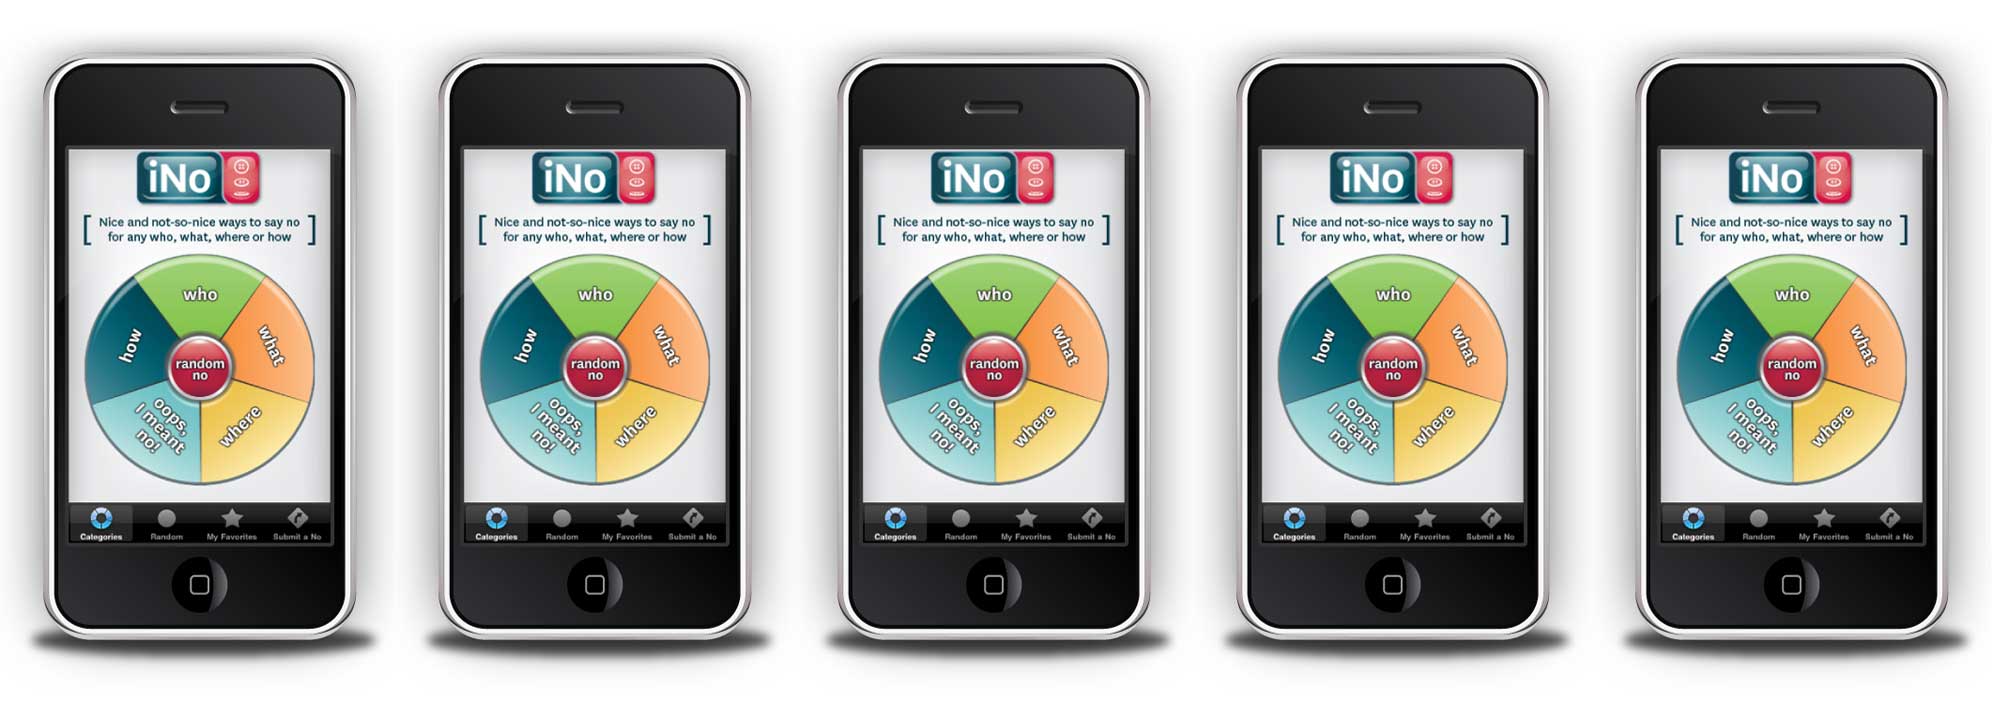 iNo - The iPhone App That Gives You 1,000 Ways To Say No